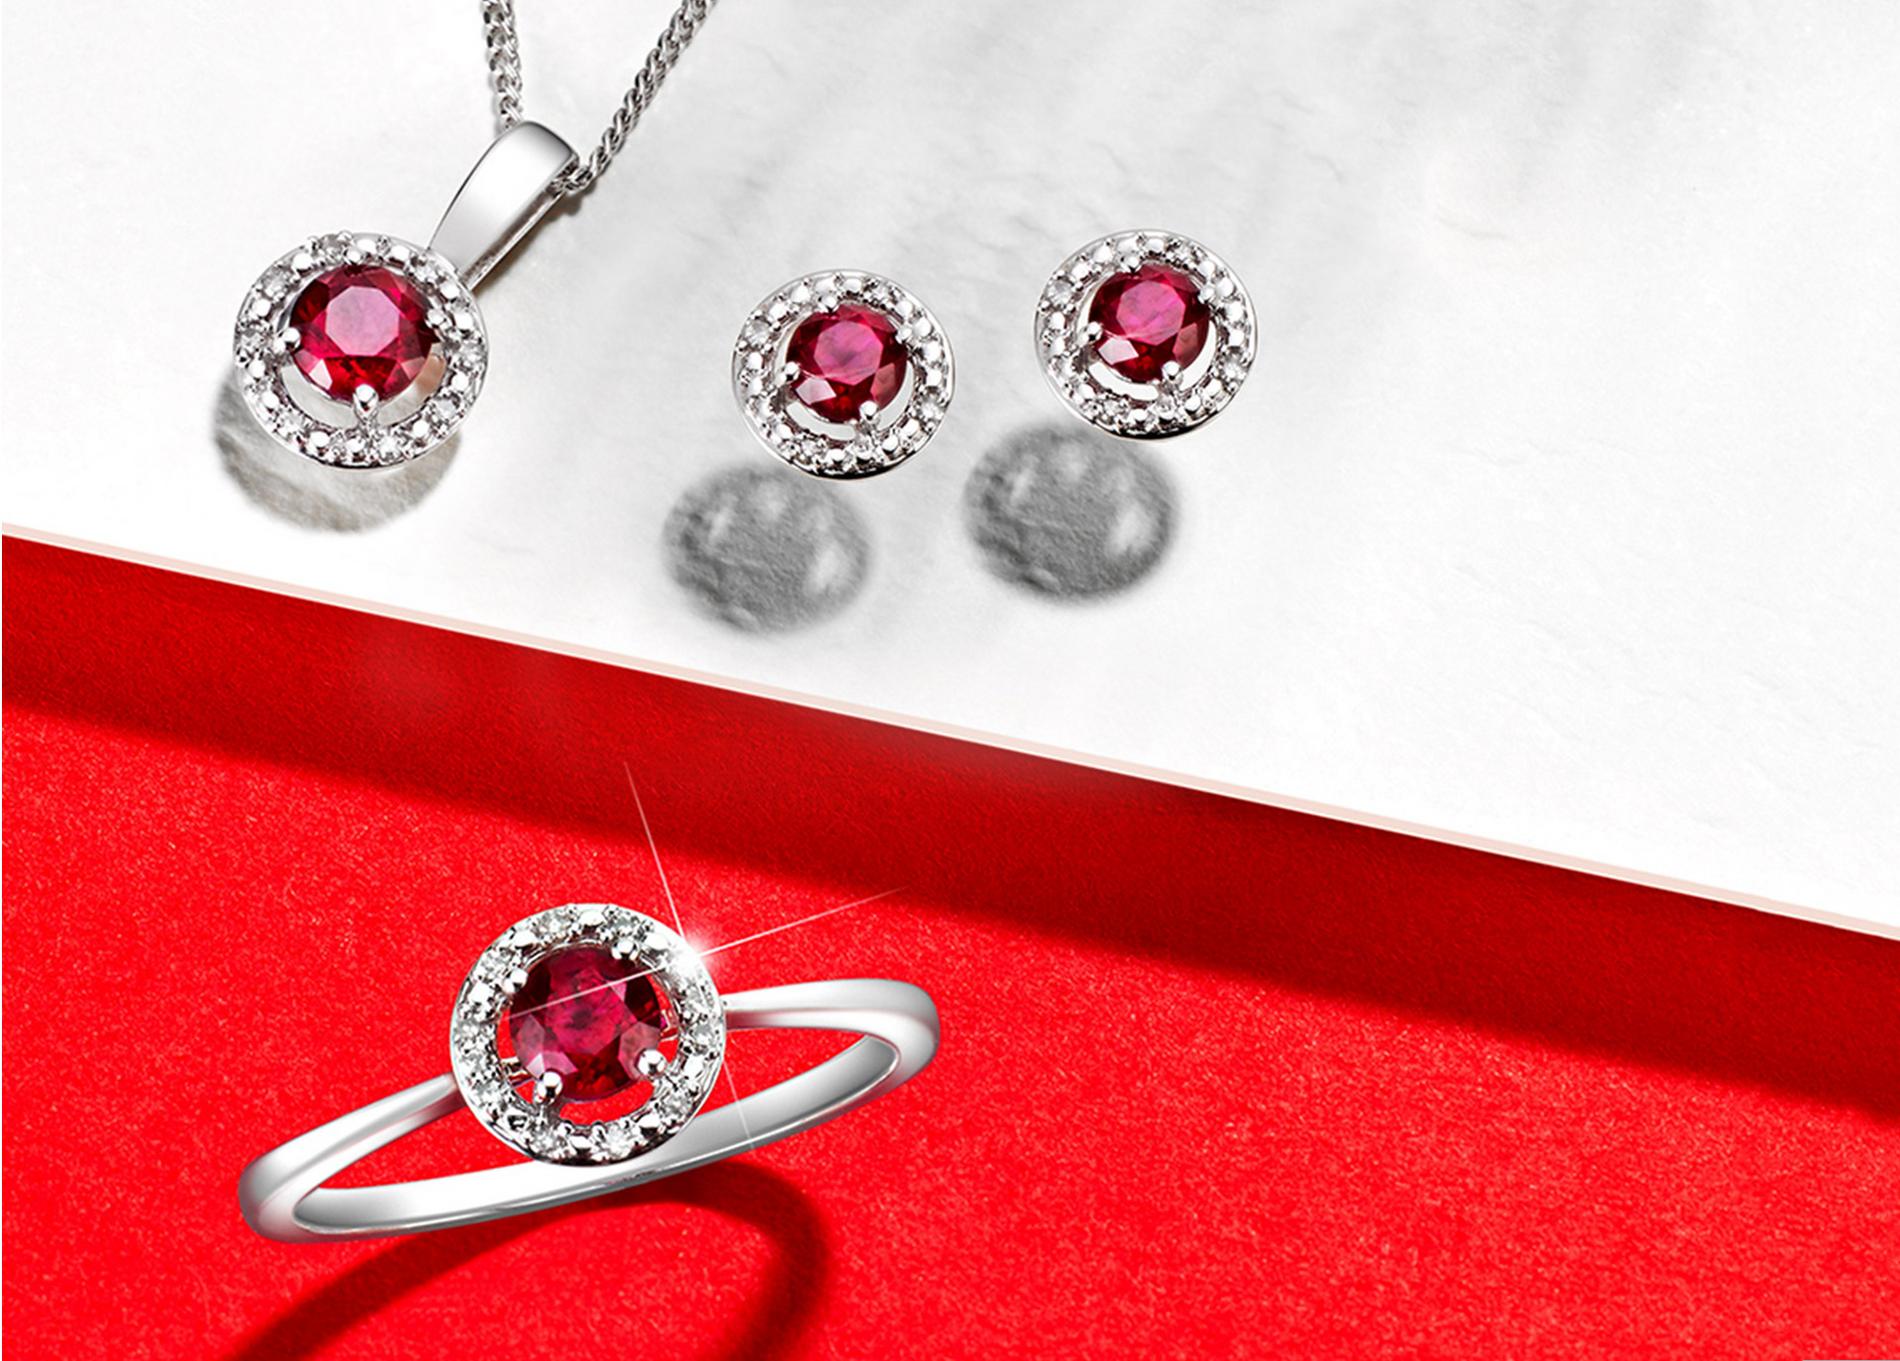 Ruby necklace, ring and earrings.